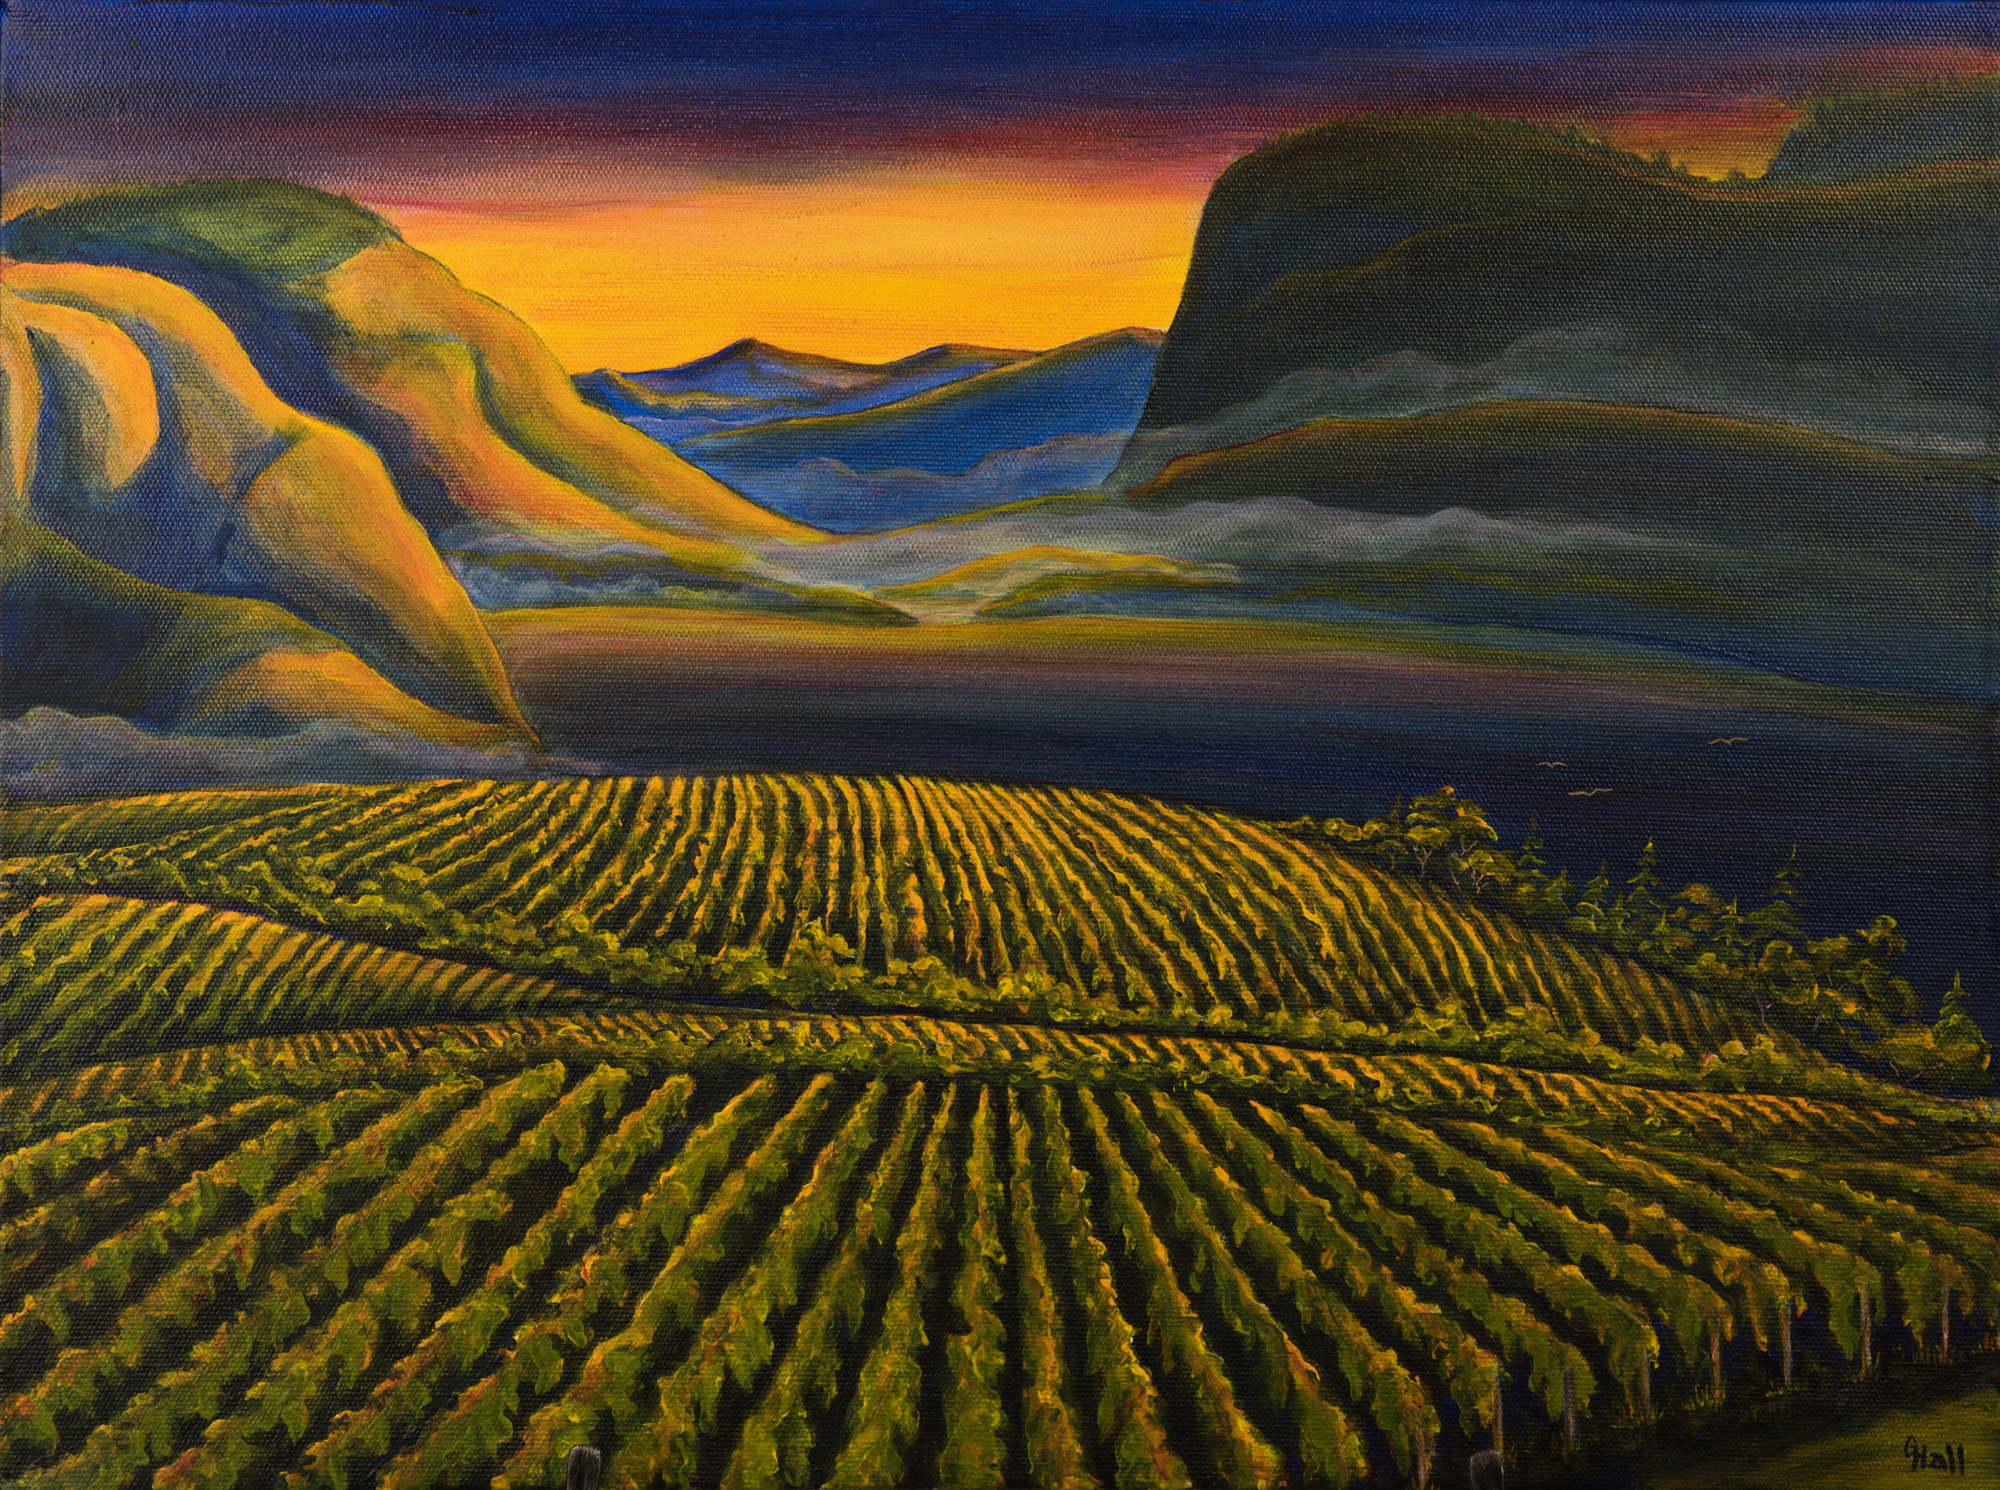 A painting by Ginny Hall depicting an Okanagan winery.